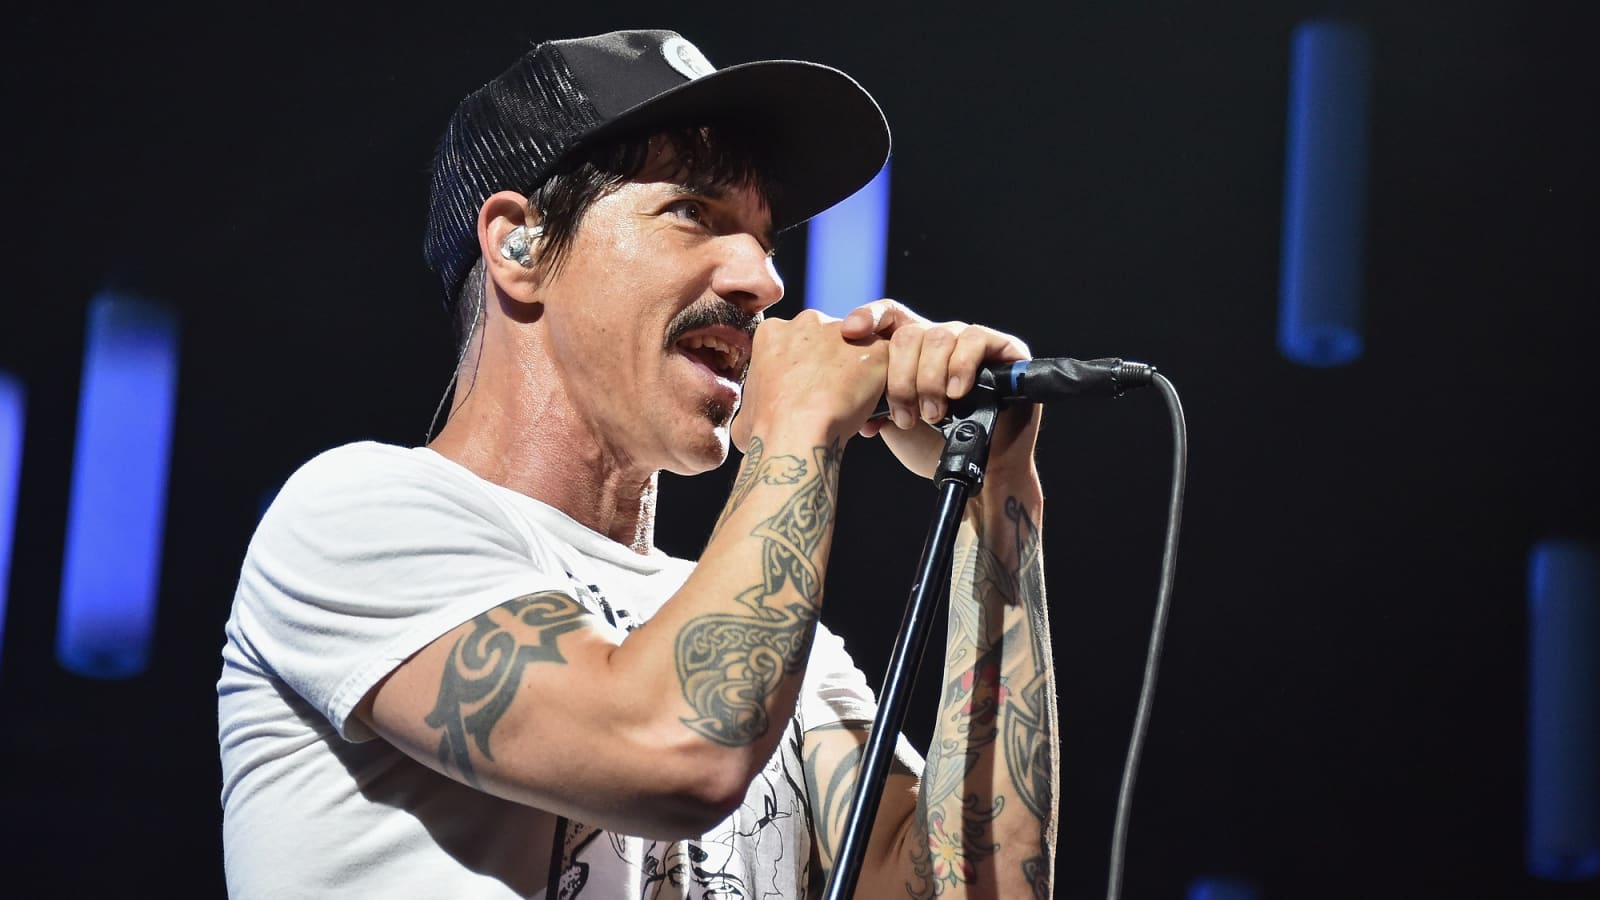 How Chili Peppers' Kiedis spends his money